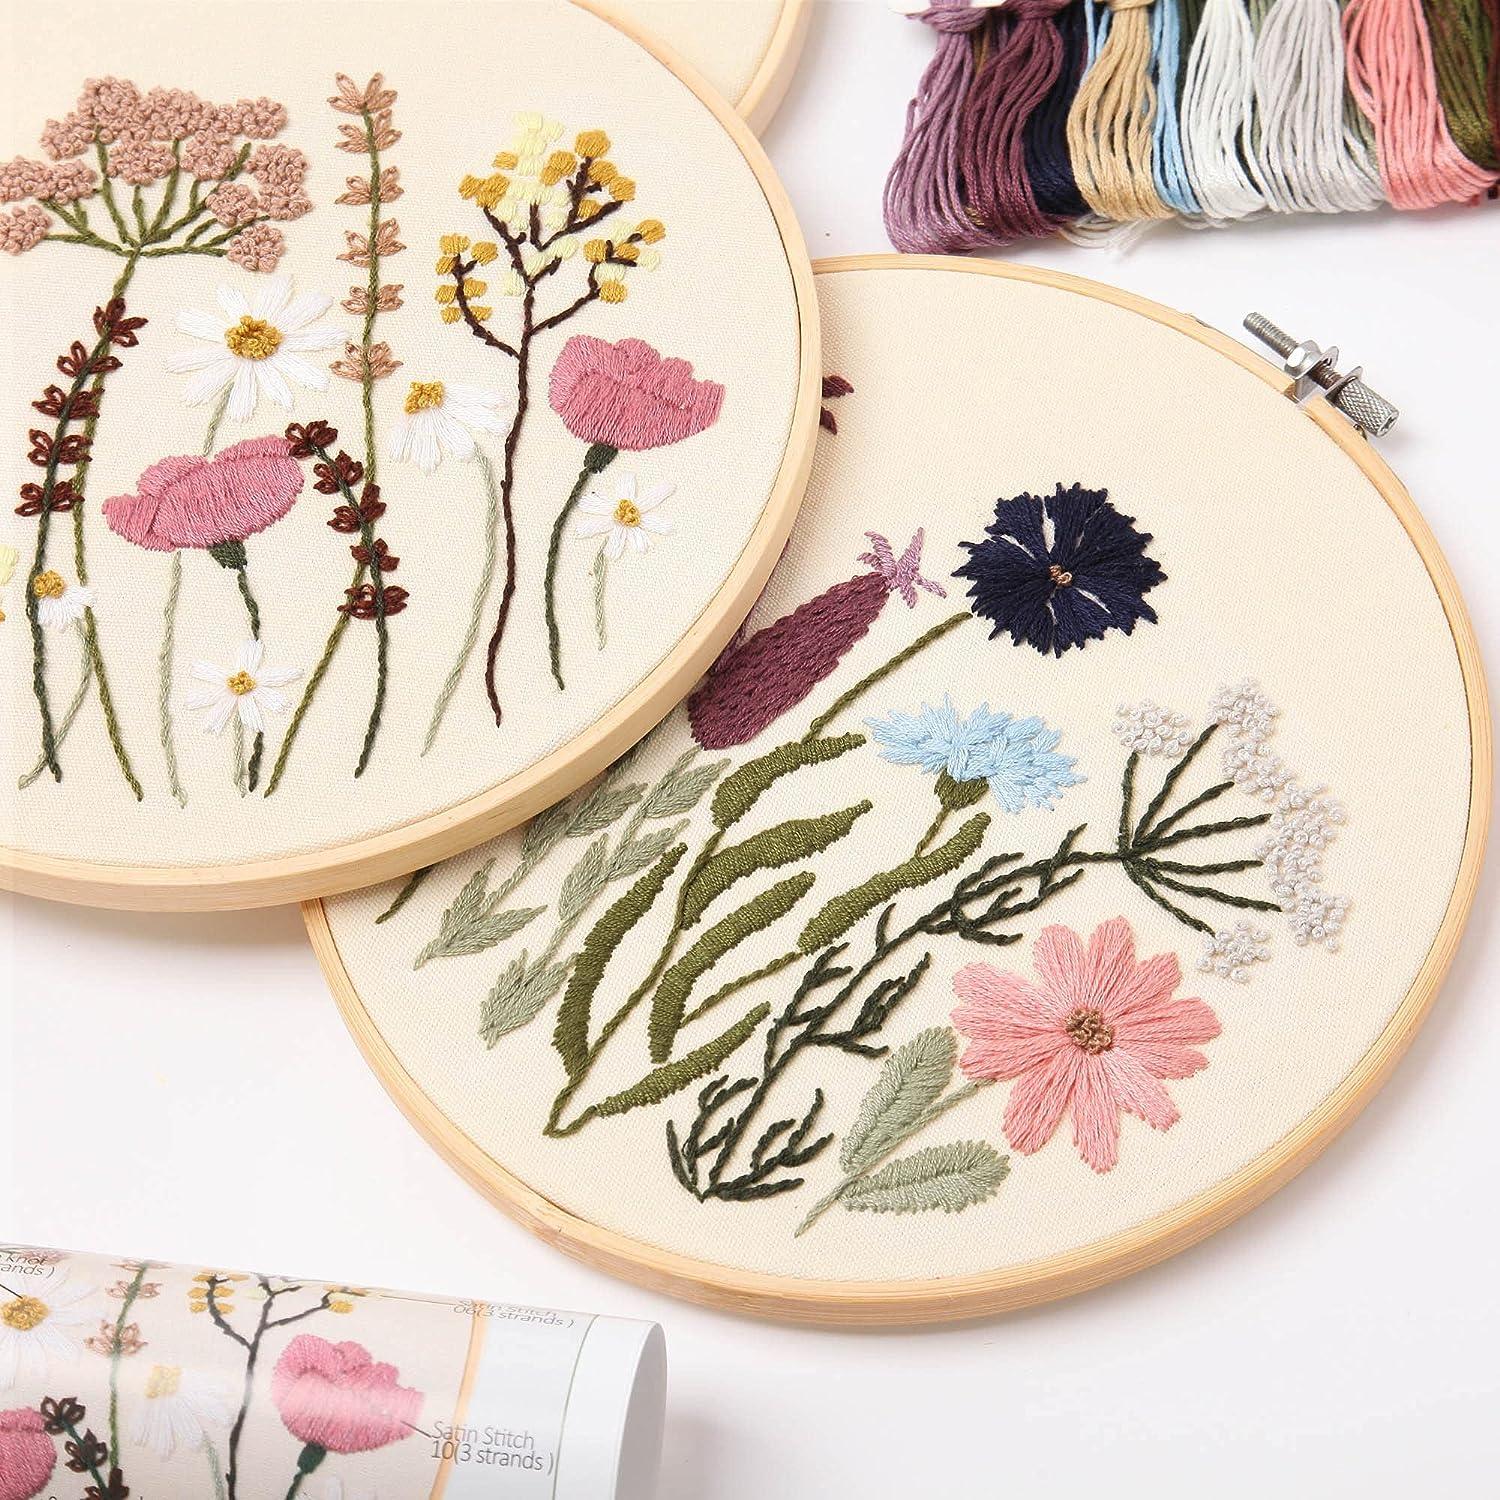 Easy Flower Embroidery Kit for Beginners Decor Embroidery Set English Manual